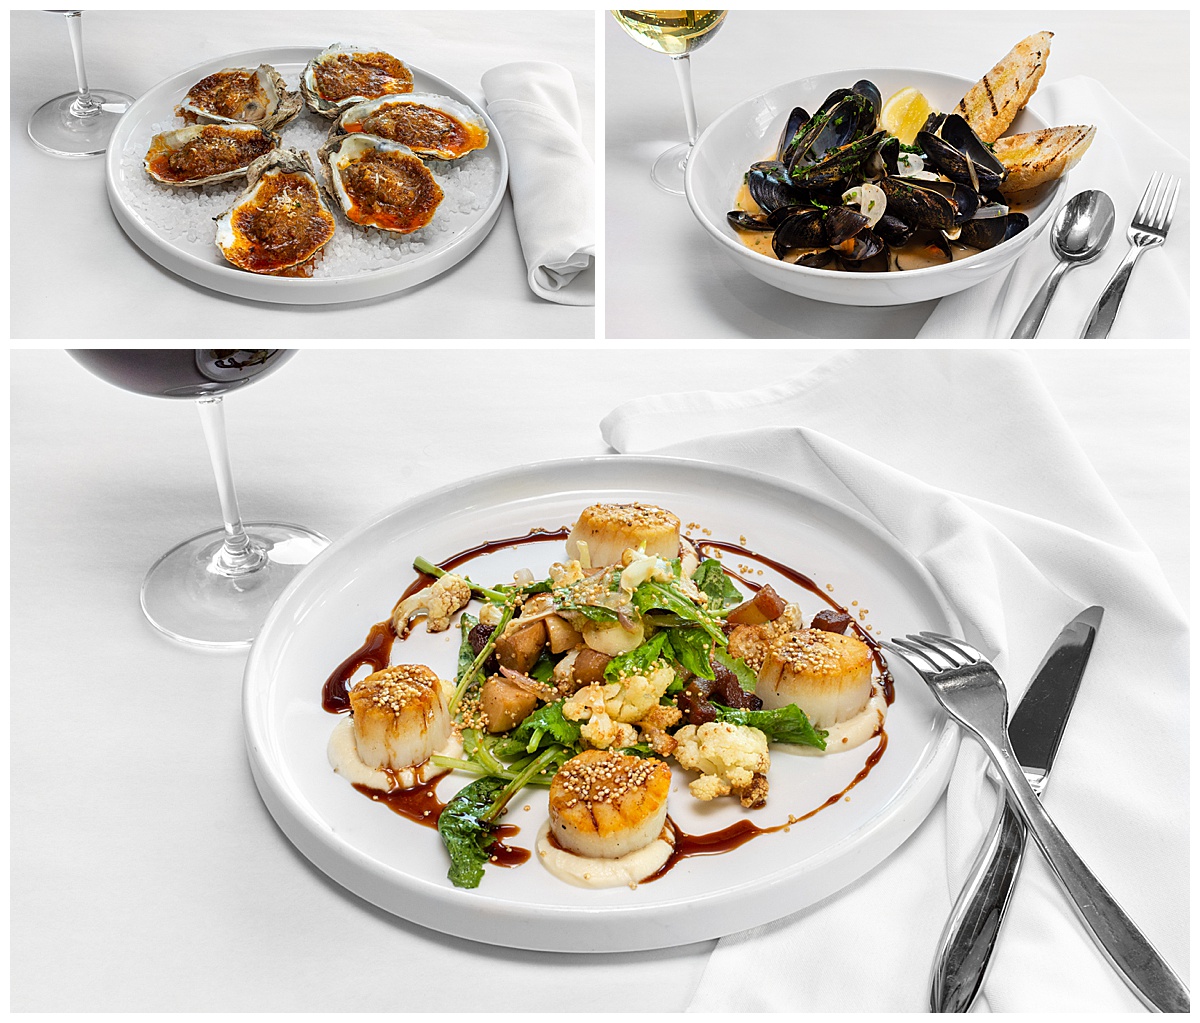 Main dishes from Jax Fish House & Oyster Bar Restaurant sit on white plates with a white tablecloth, white napkins, wine, and silverware around them.